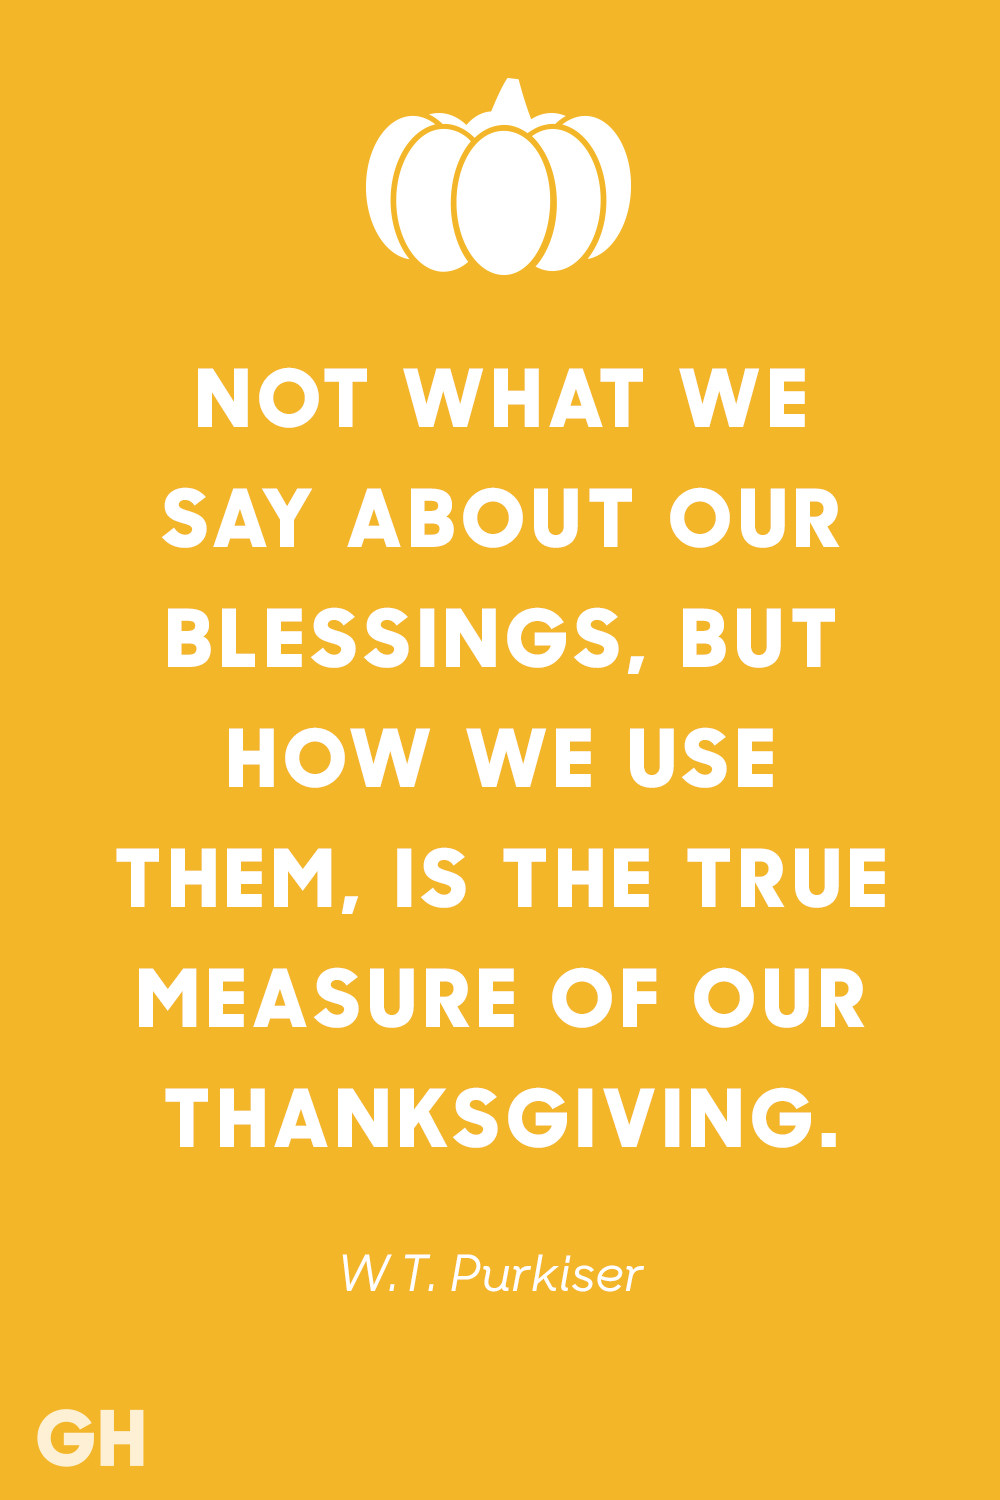 Thanksgiving Sayings And Quotes
 15 Best Thanksgiving Quotes Inspirational and Funny